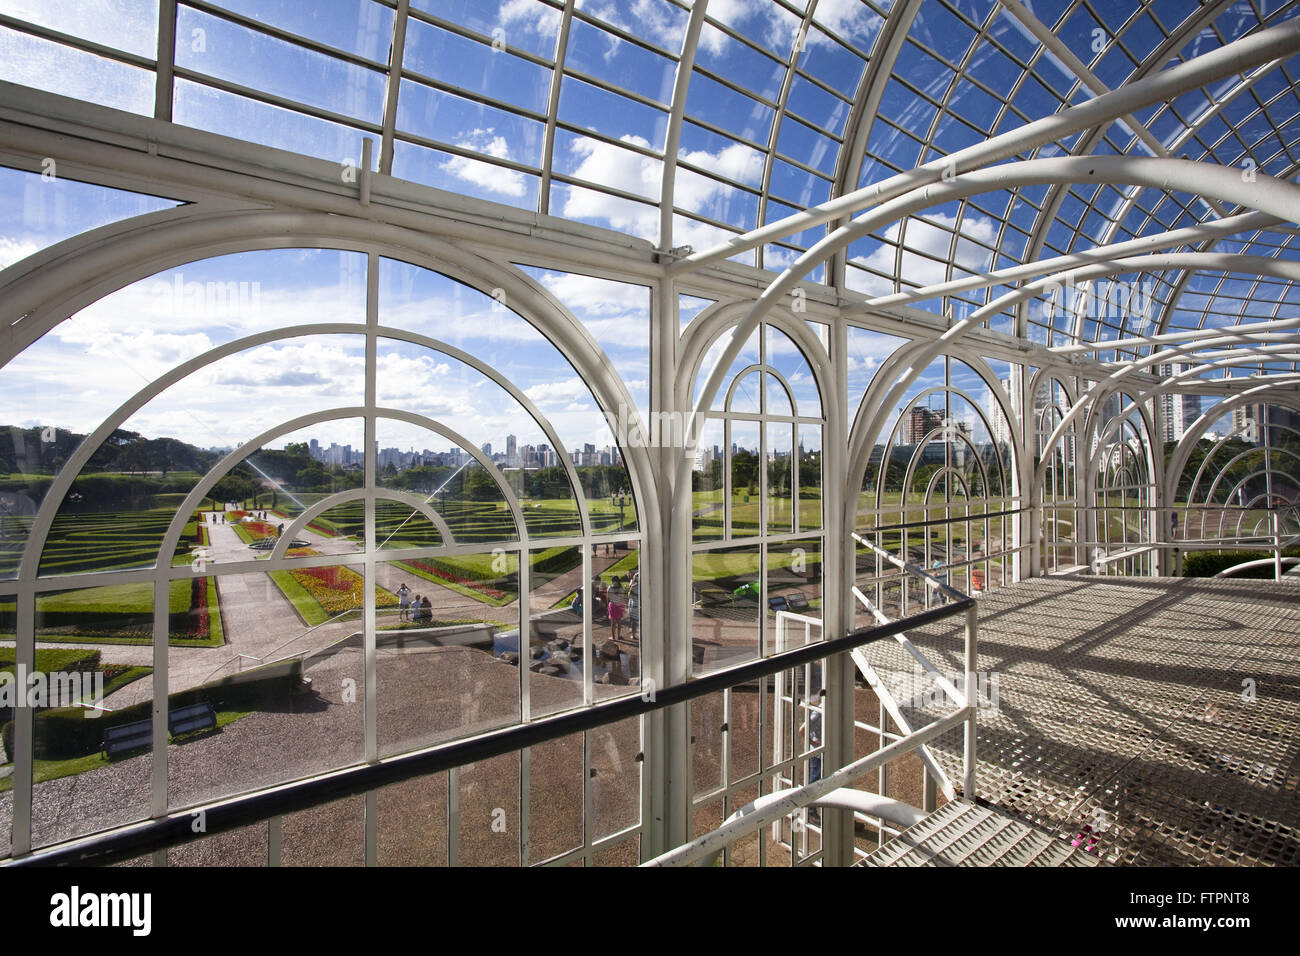 Metal structure of greenhouse Botanical Garden of Curitiba - opened in 1991 Stock Photo